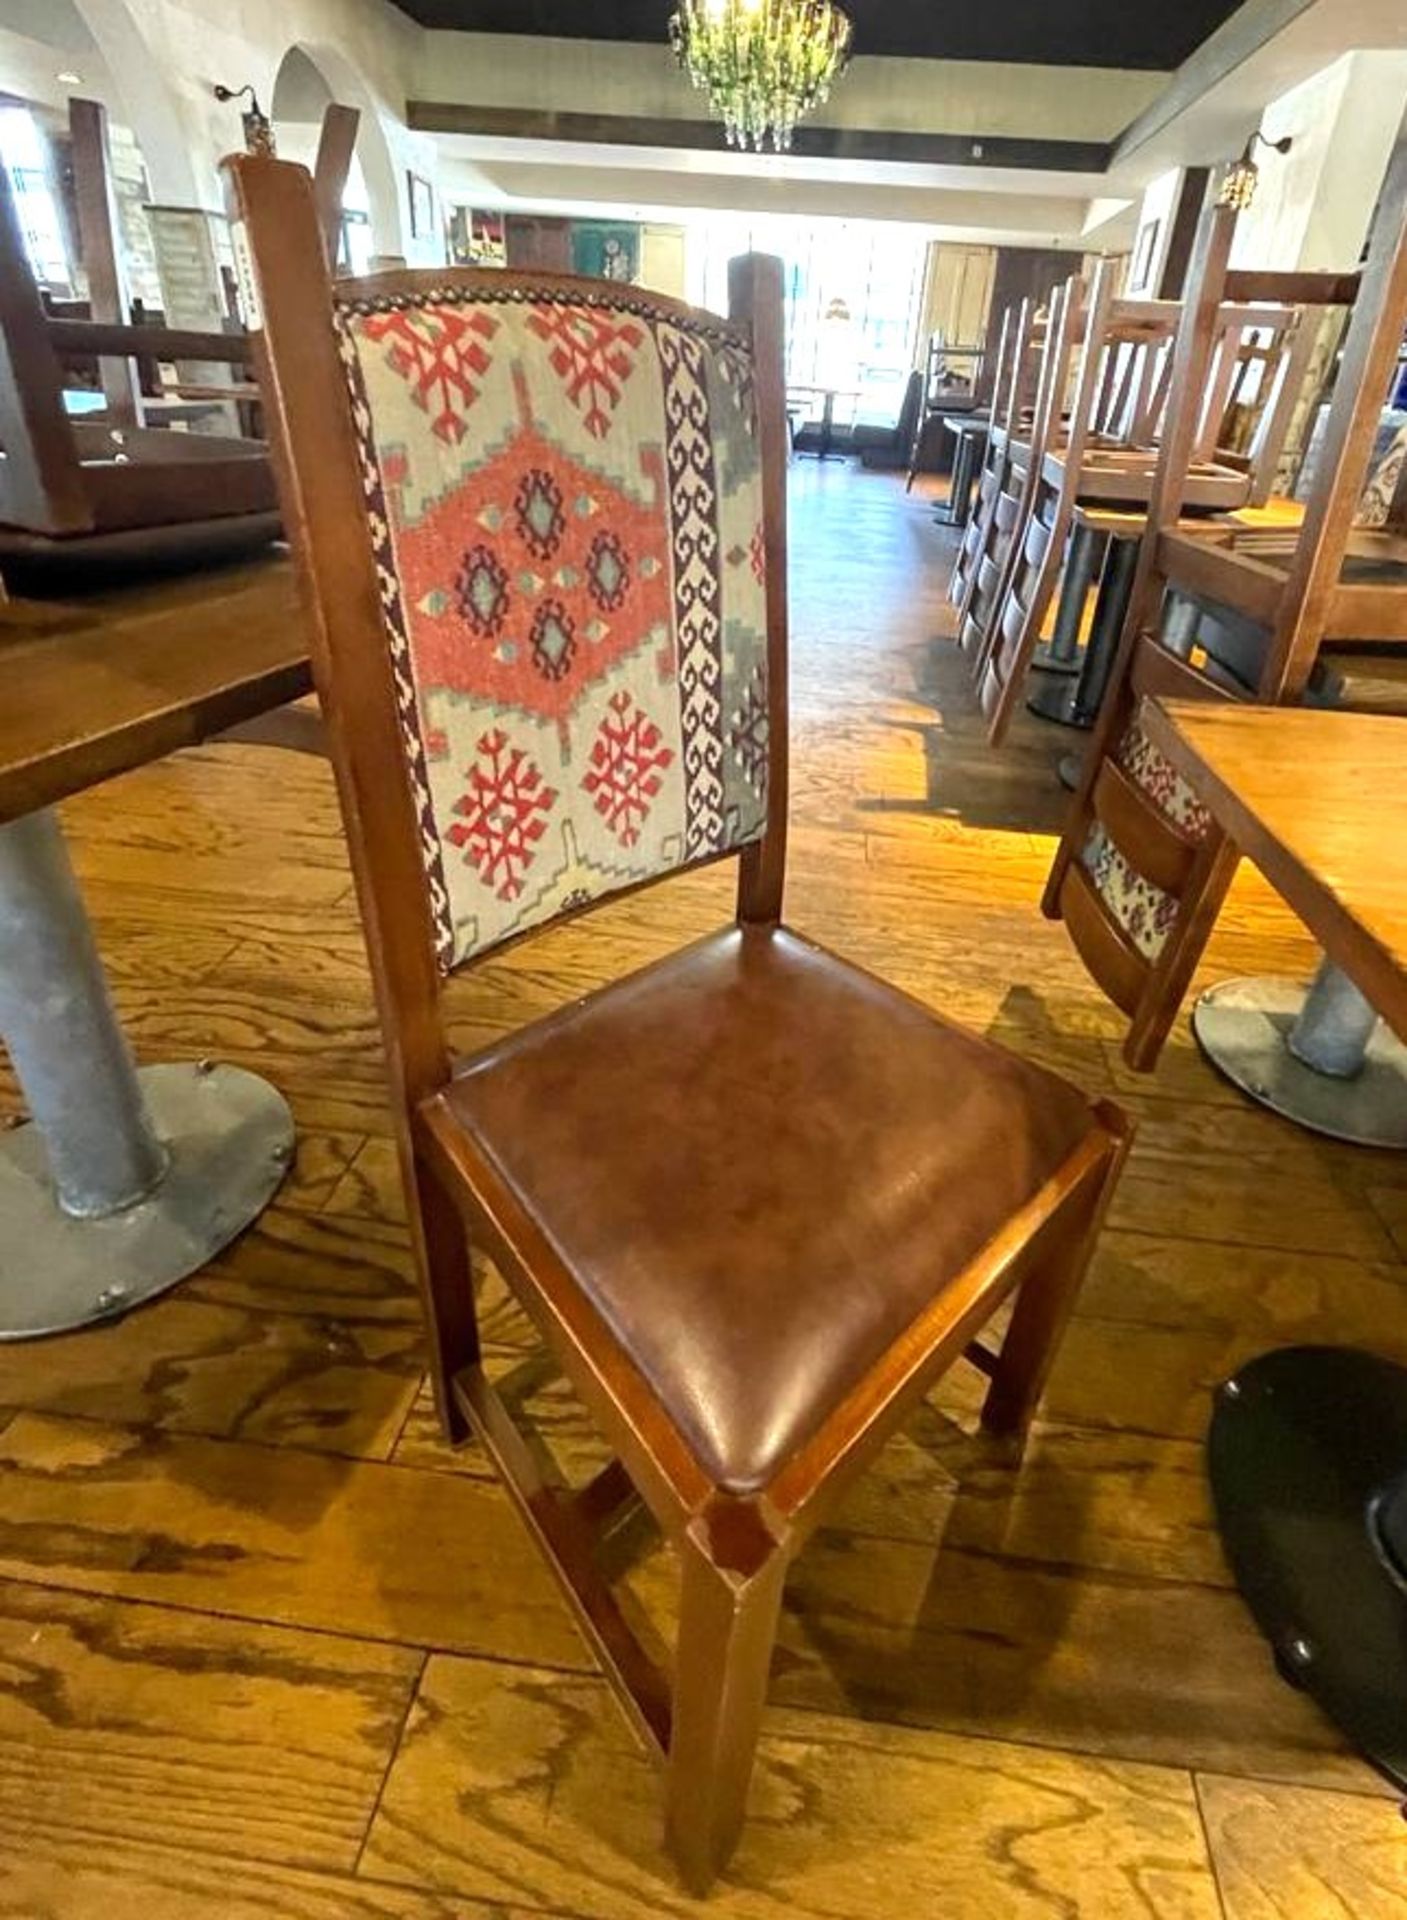 15 x High Back Dining Chairs From a Mexican Themed Restaurant - Features Wooden Frames, Brown Seat